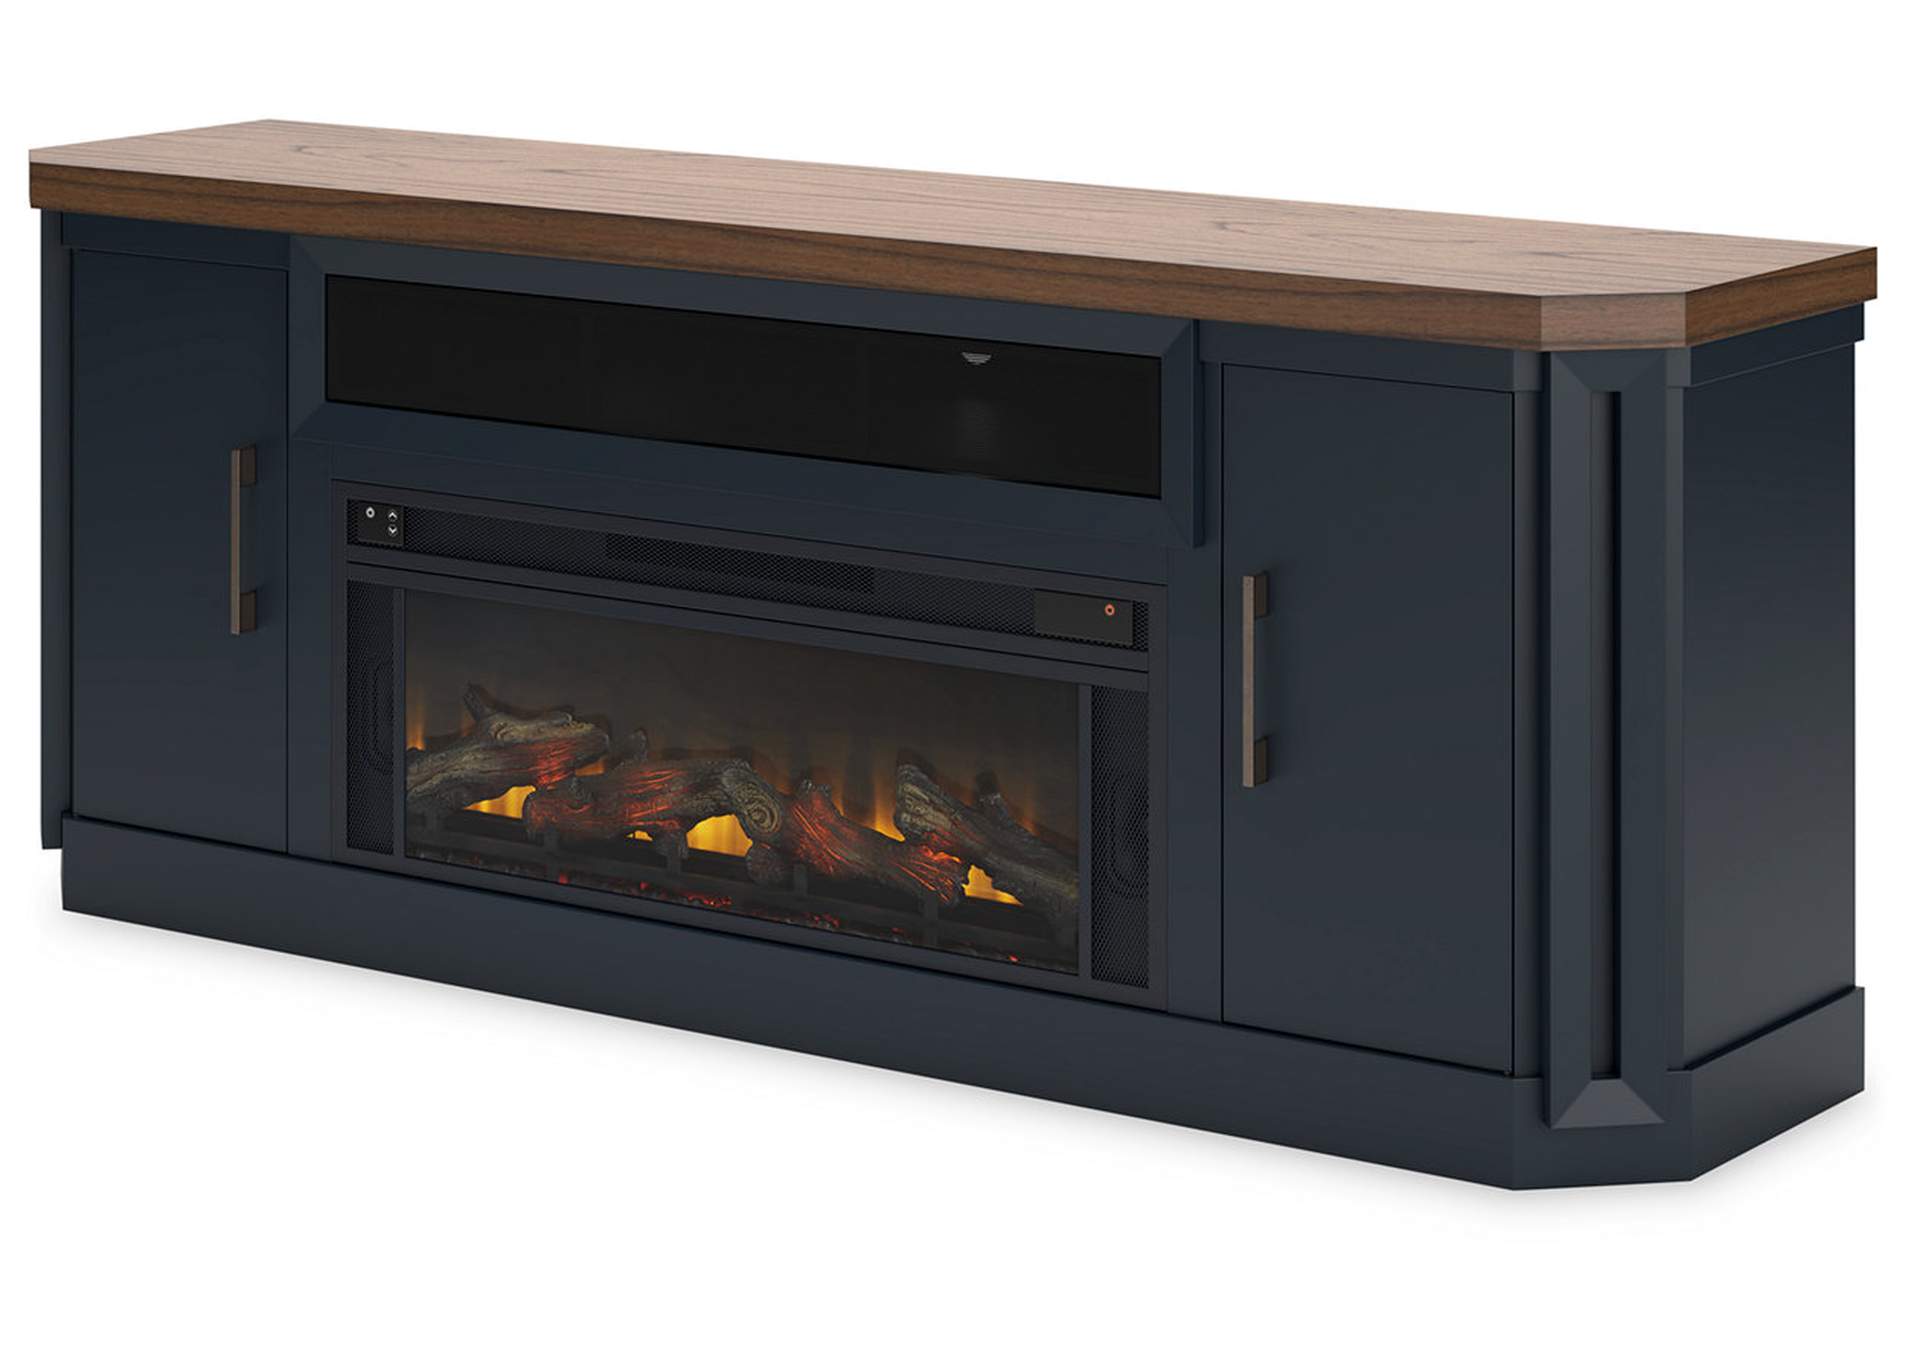 Landocken 83" TV Stand with Electric Fireplace,Signature Design By Ashley